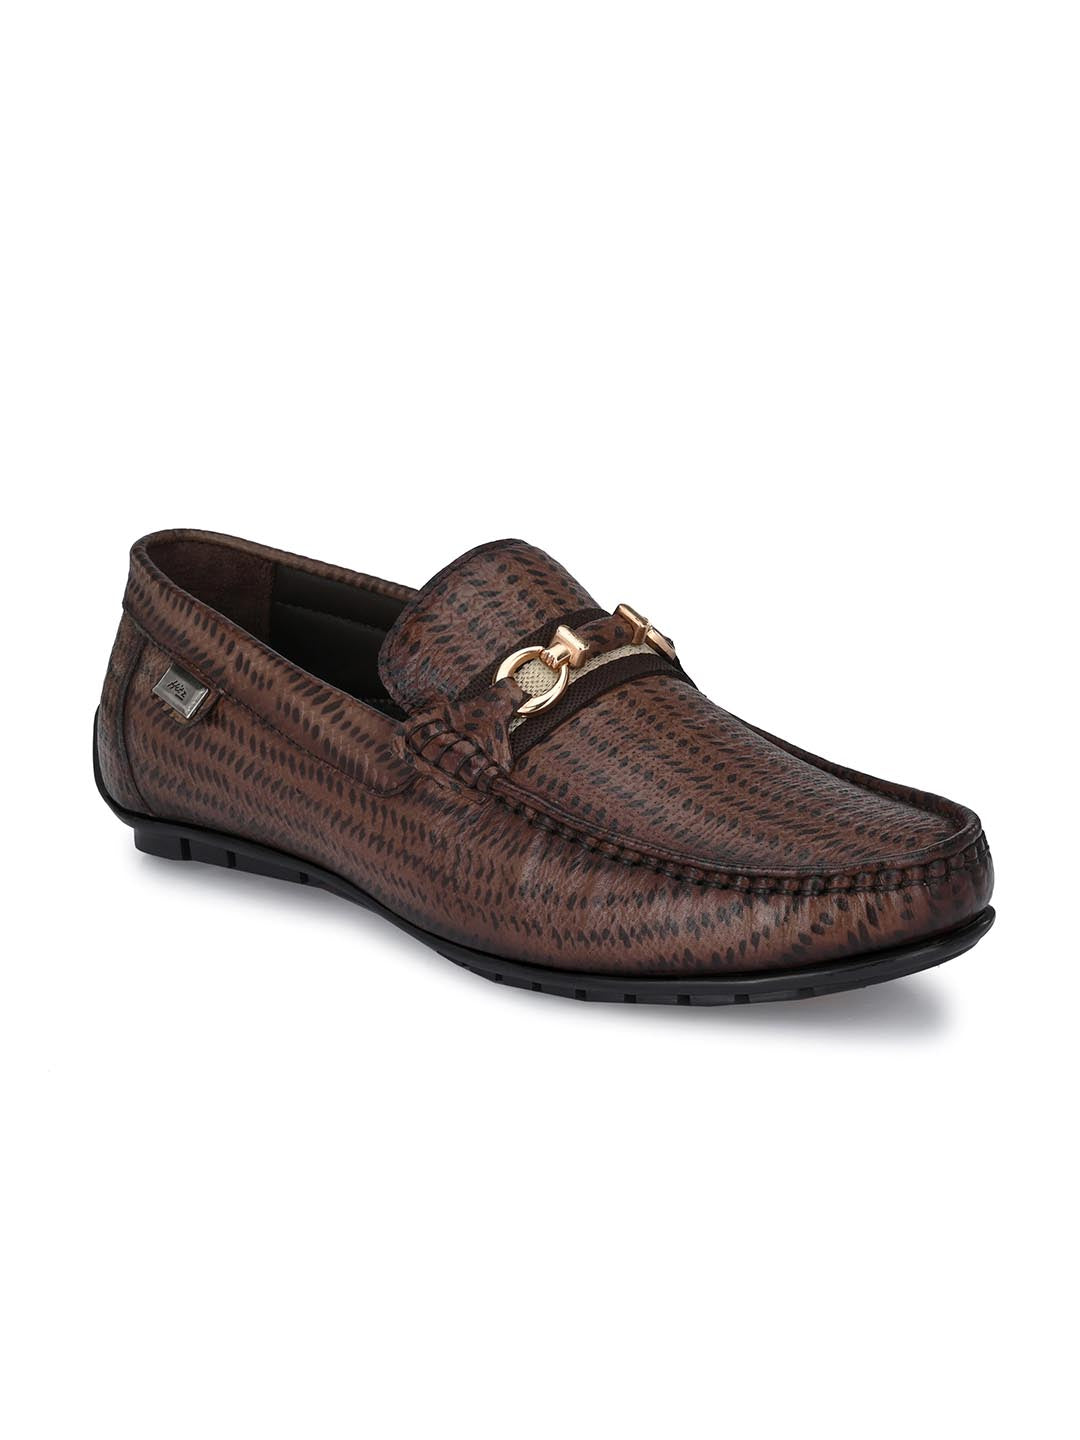 Beefroll Penny Loafers - Carolina Brown Chromexcel | Rancourt & Co. | Men's  Boots and Shoes